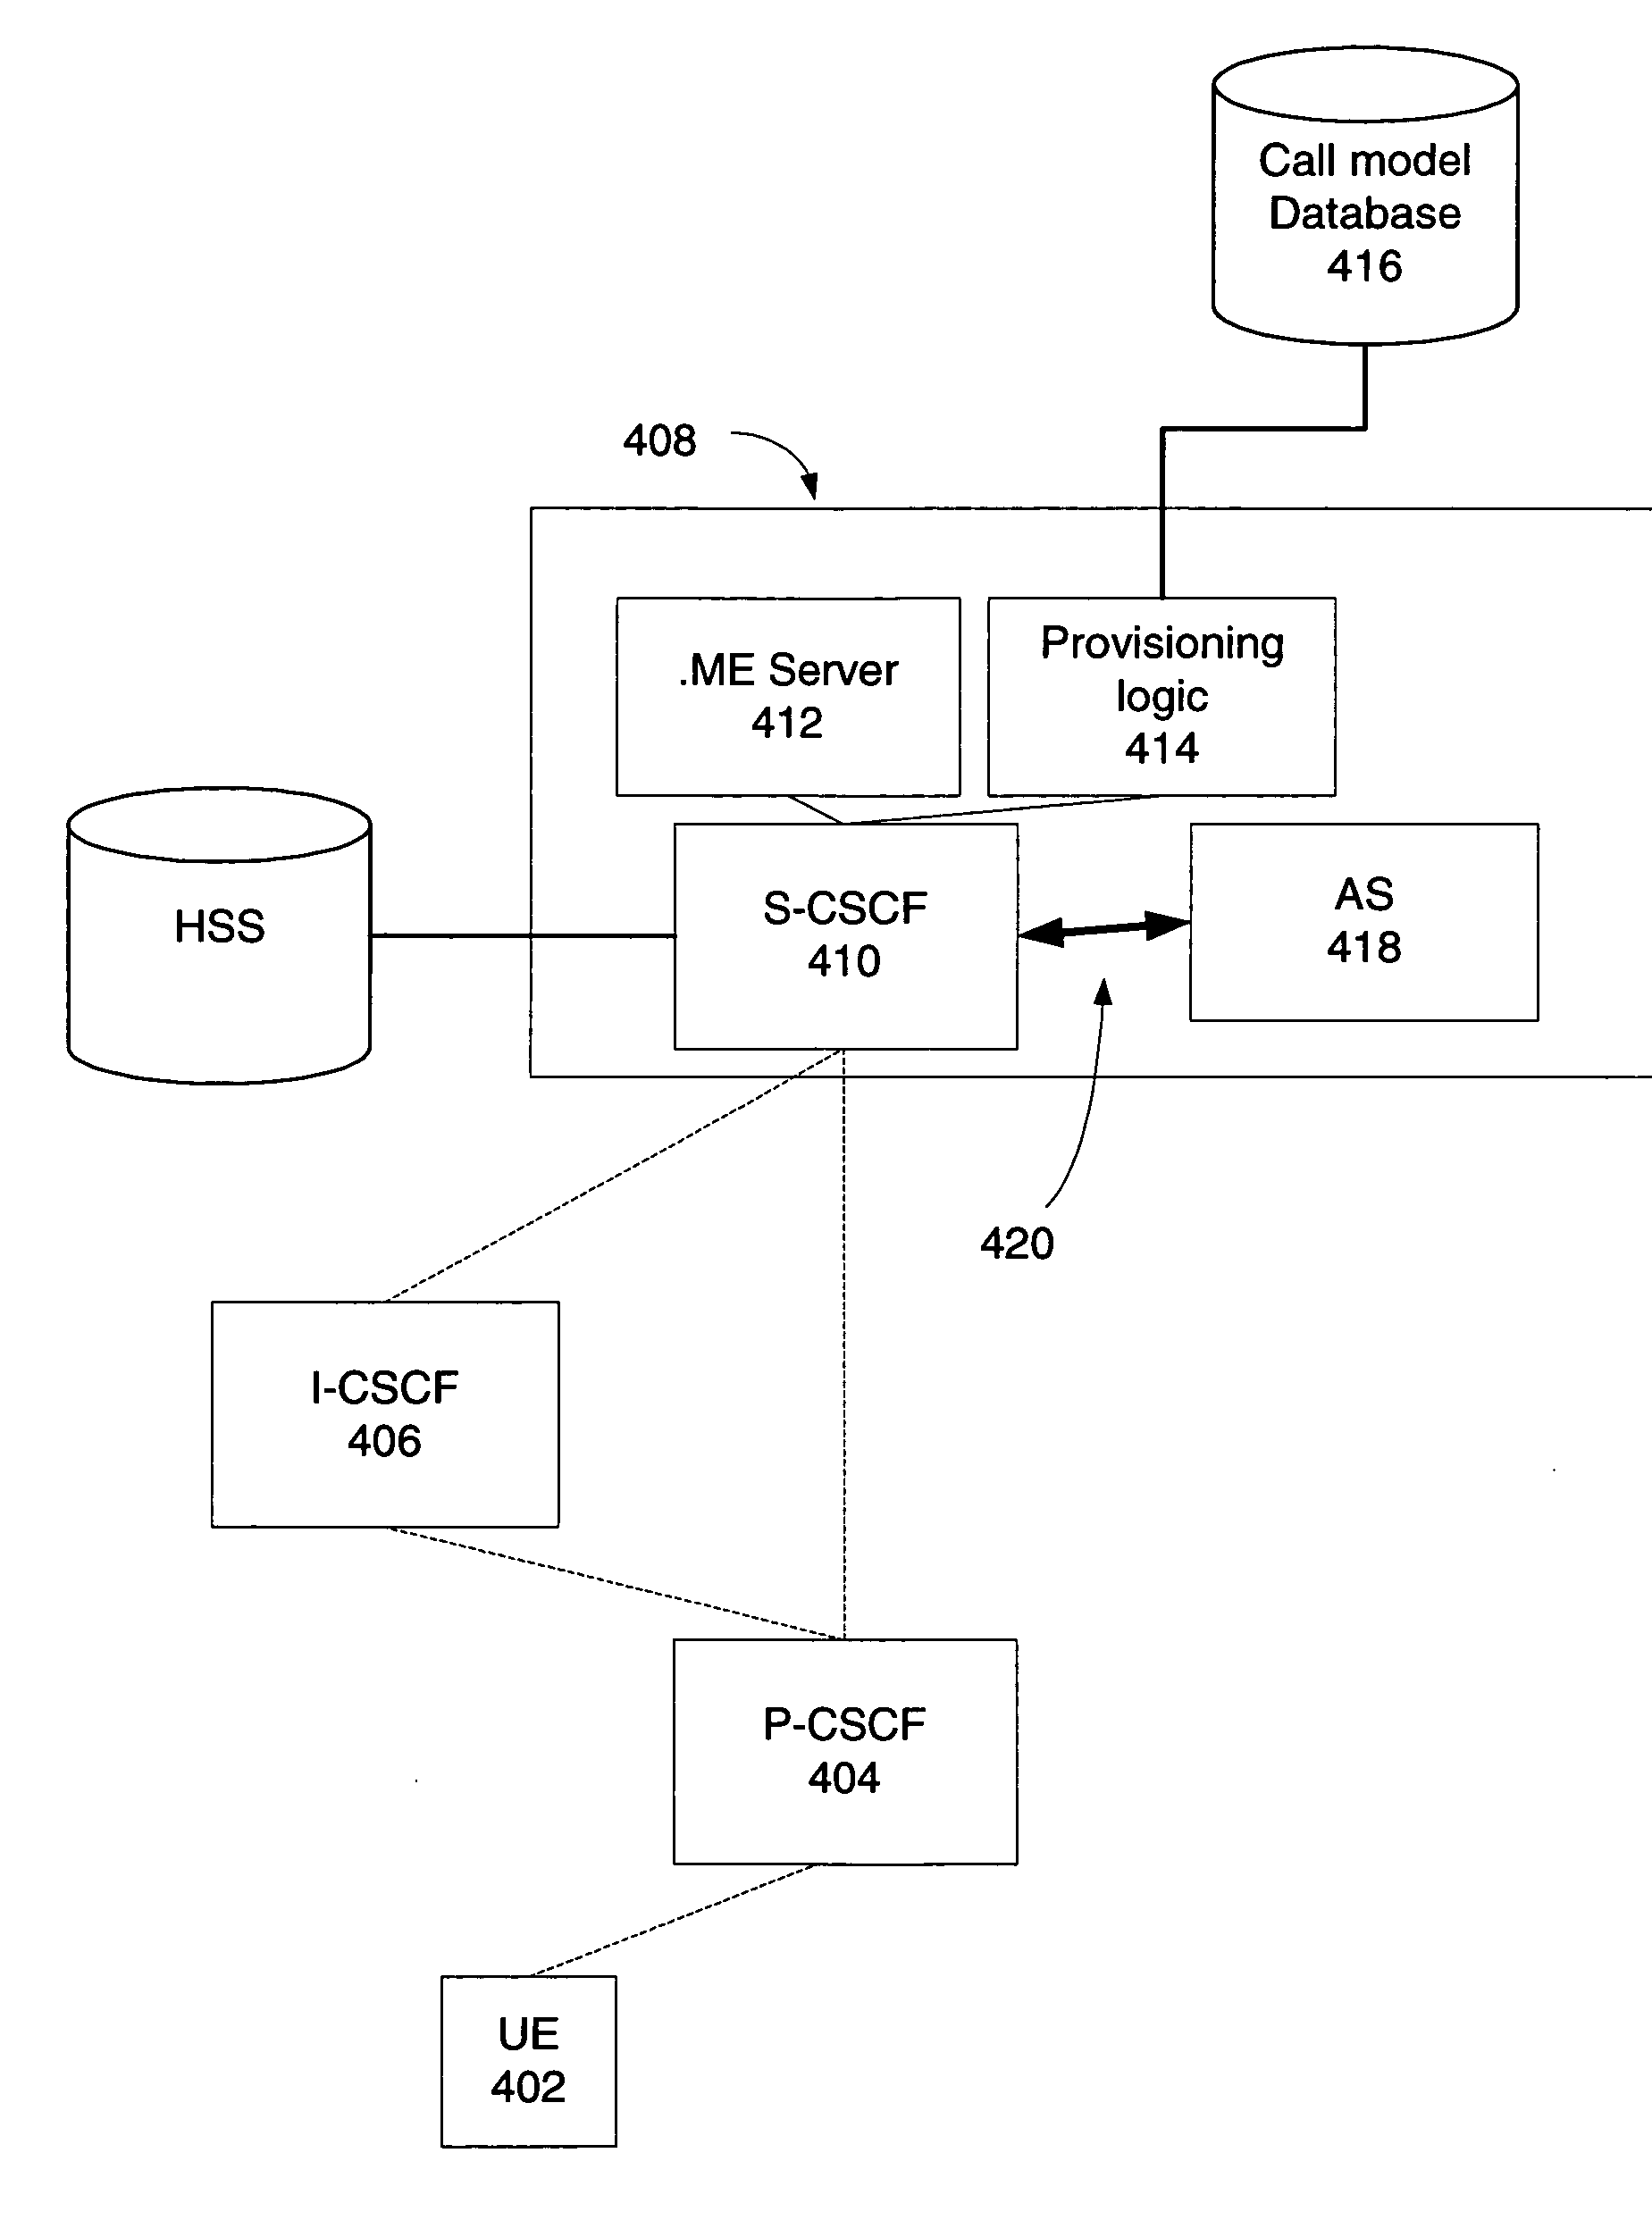 Method of avoiding or minimizing cost of stateful connections between application servers and S-CSCF nodes in an IMS network with multiple domains